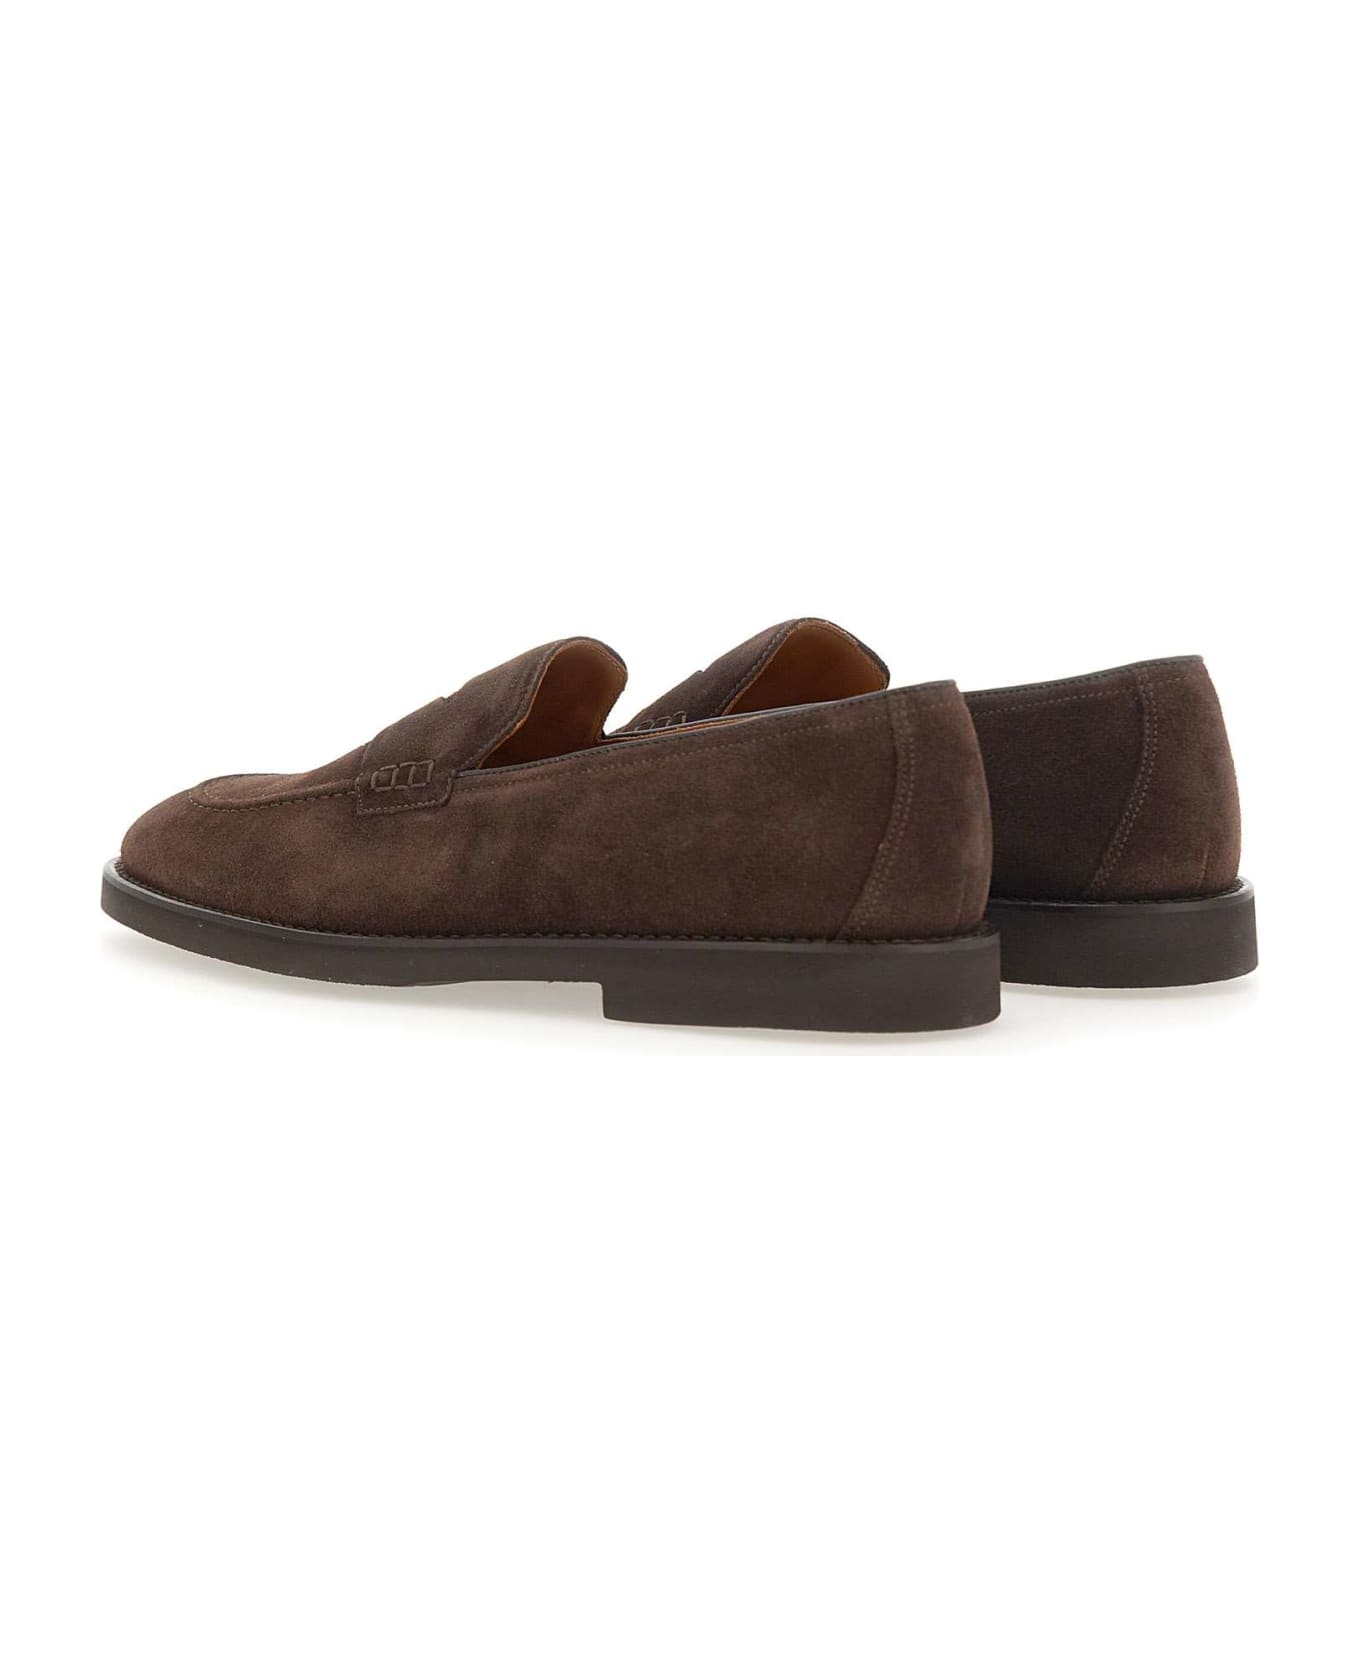 Doucal's "wash" Suede Moccasins - BROWN